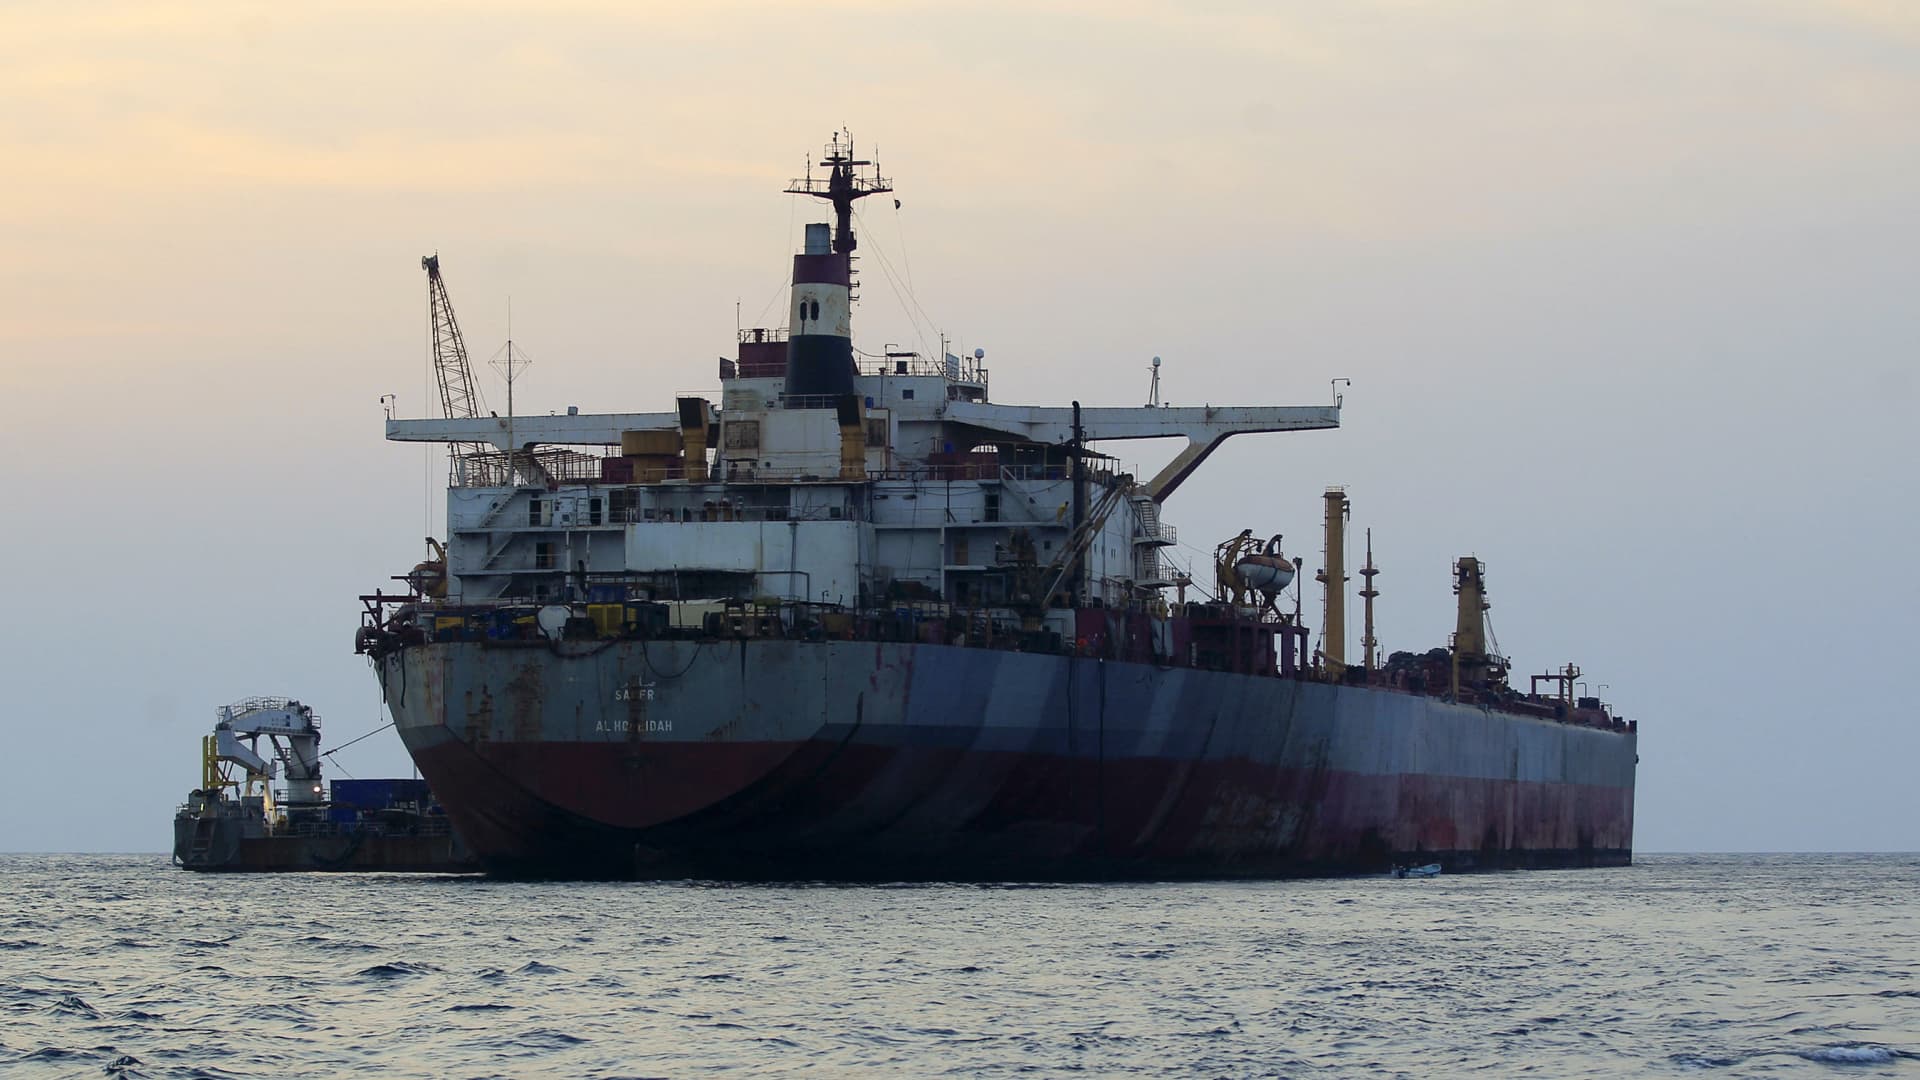 Oil prices rise as shippers suspend Red Sea route amid intensifying Houthi attacks